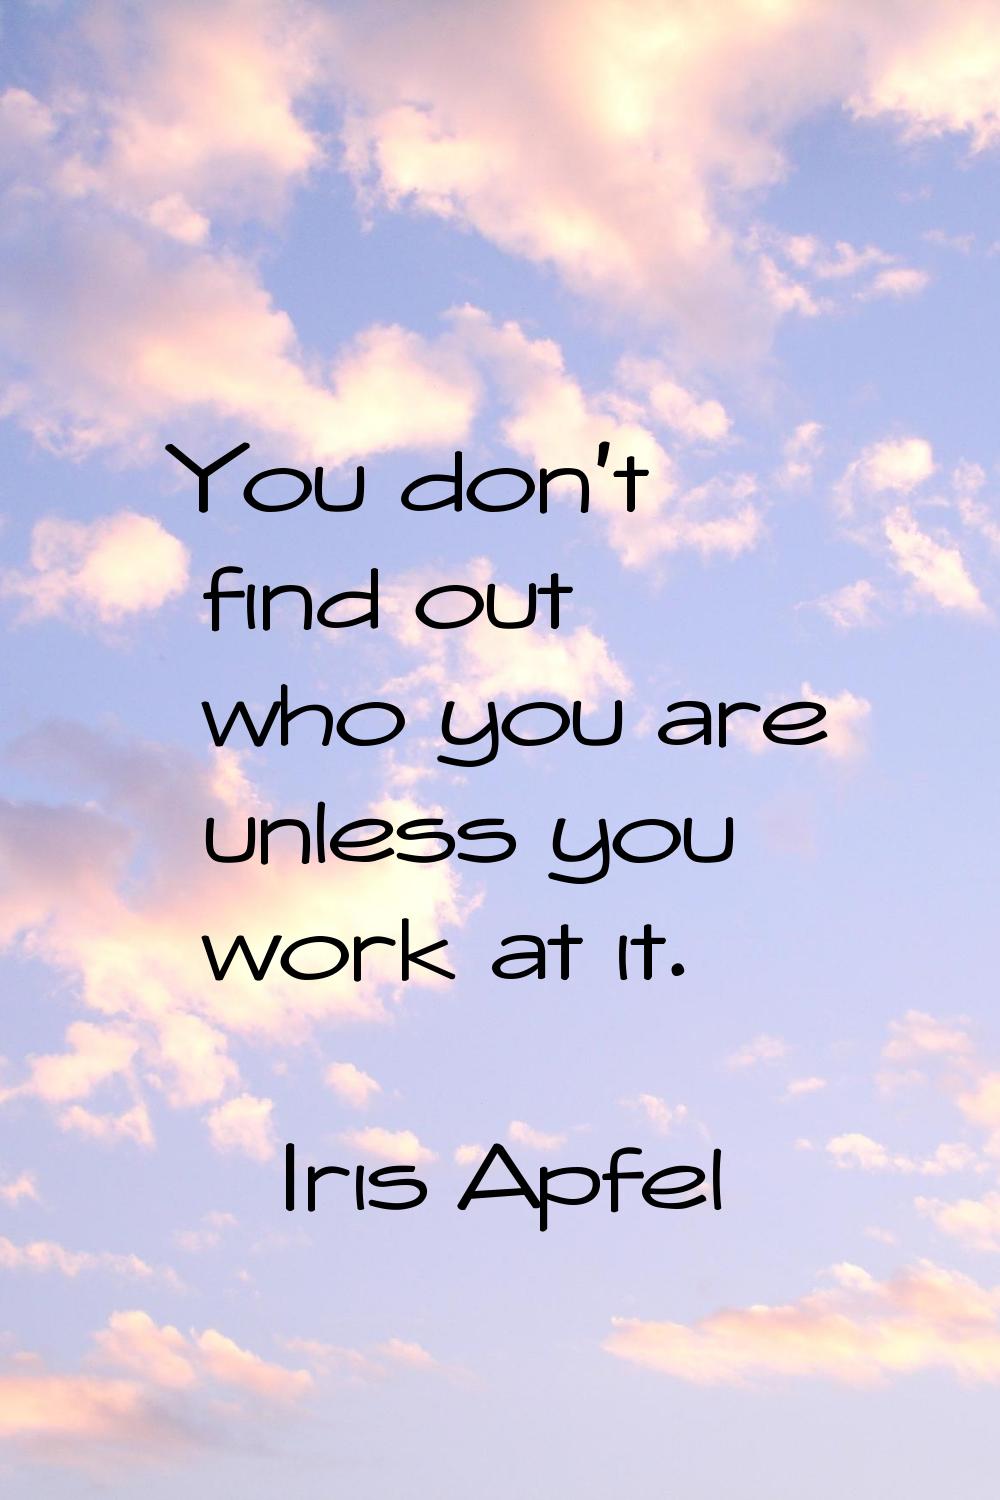 You don't find out who you are unless you work at it.